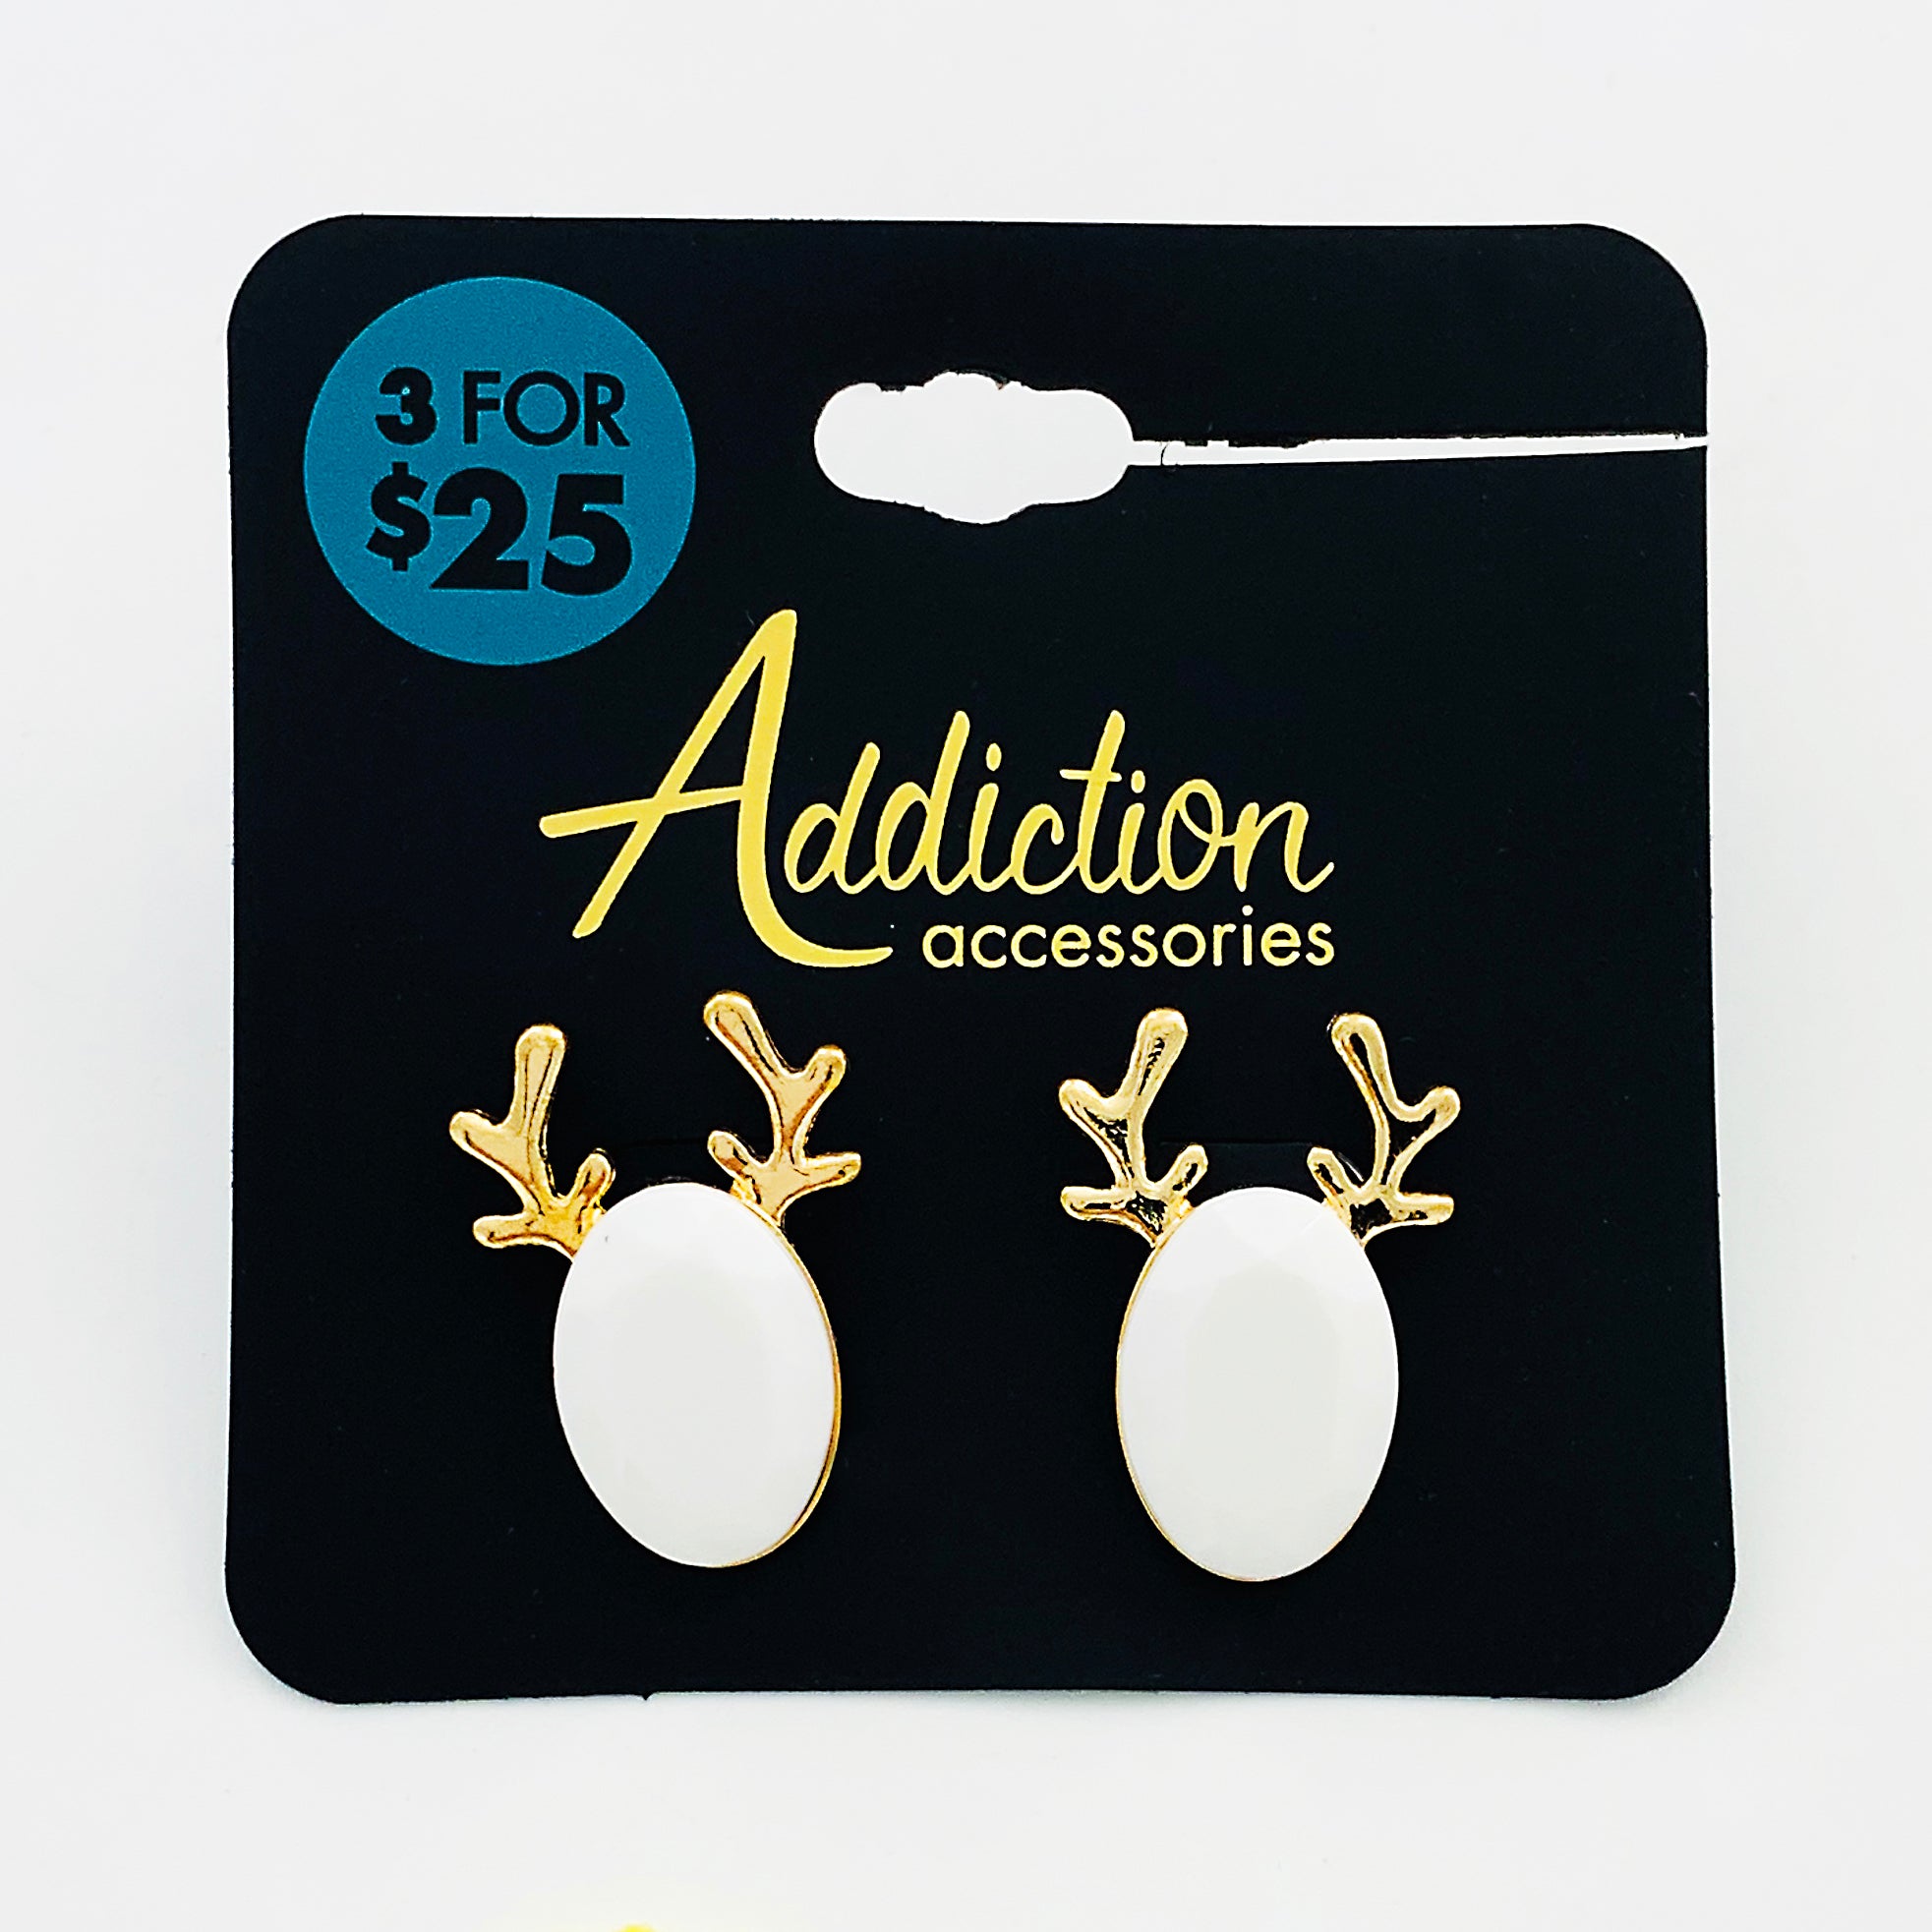 White facet stones with gold reindeer antlers